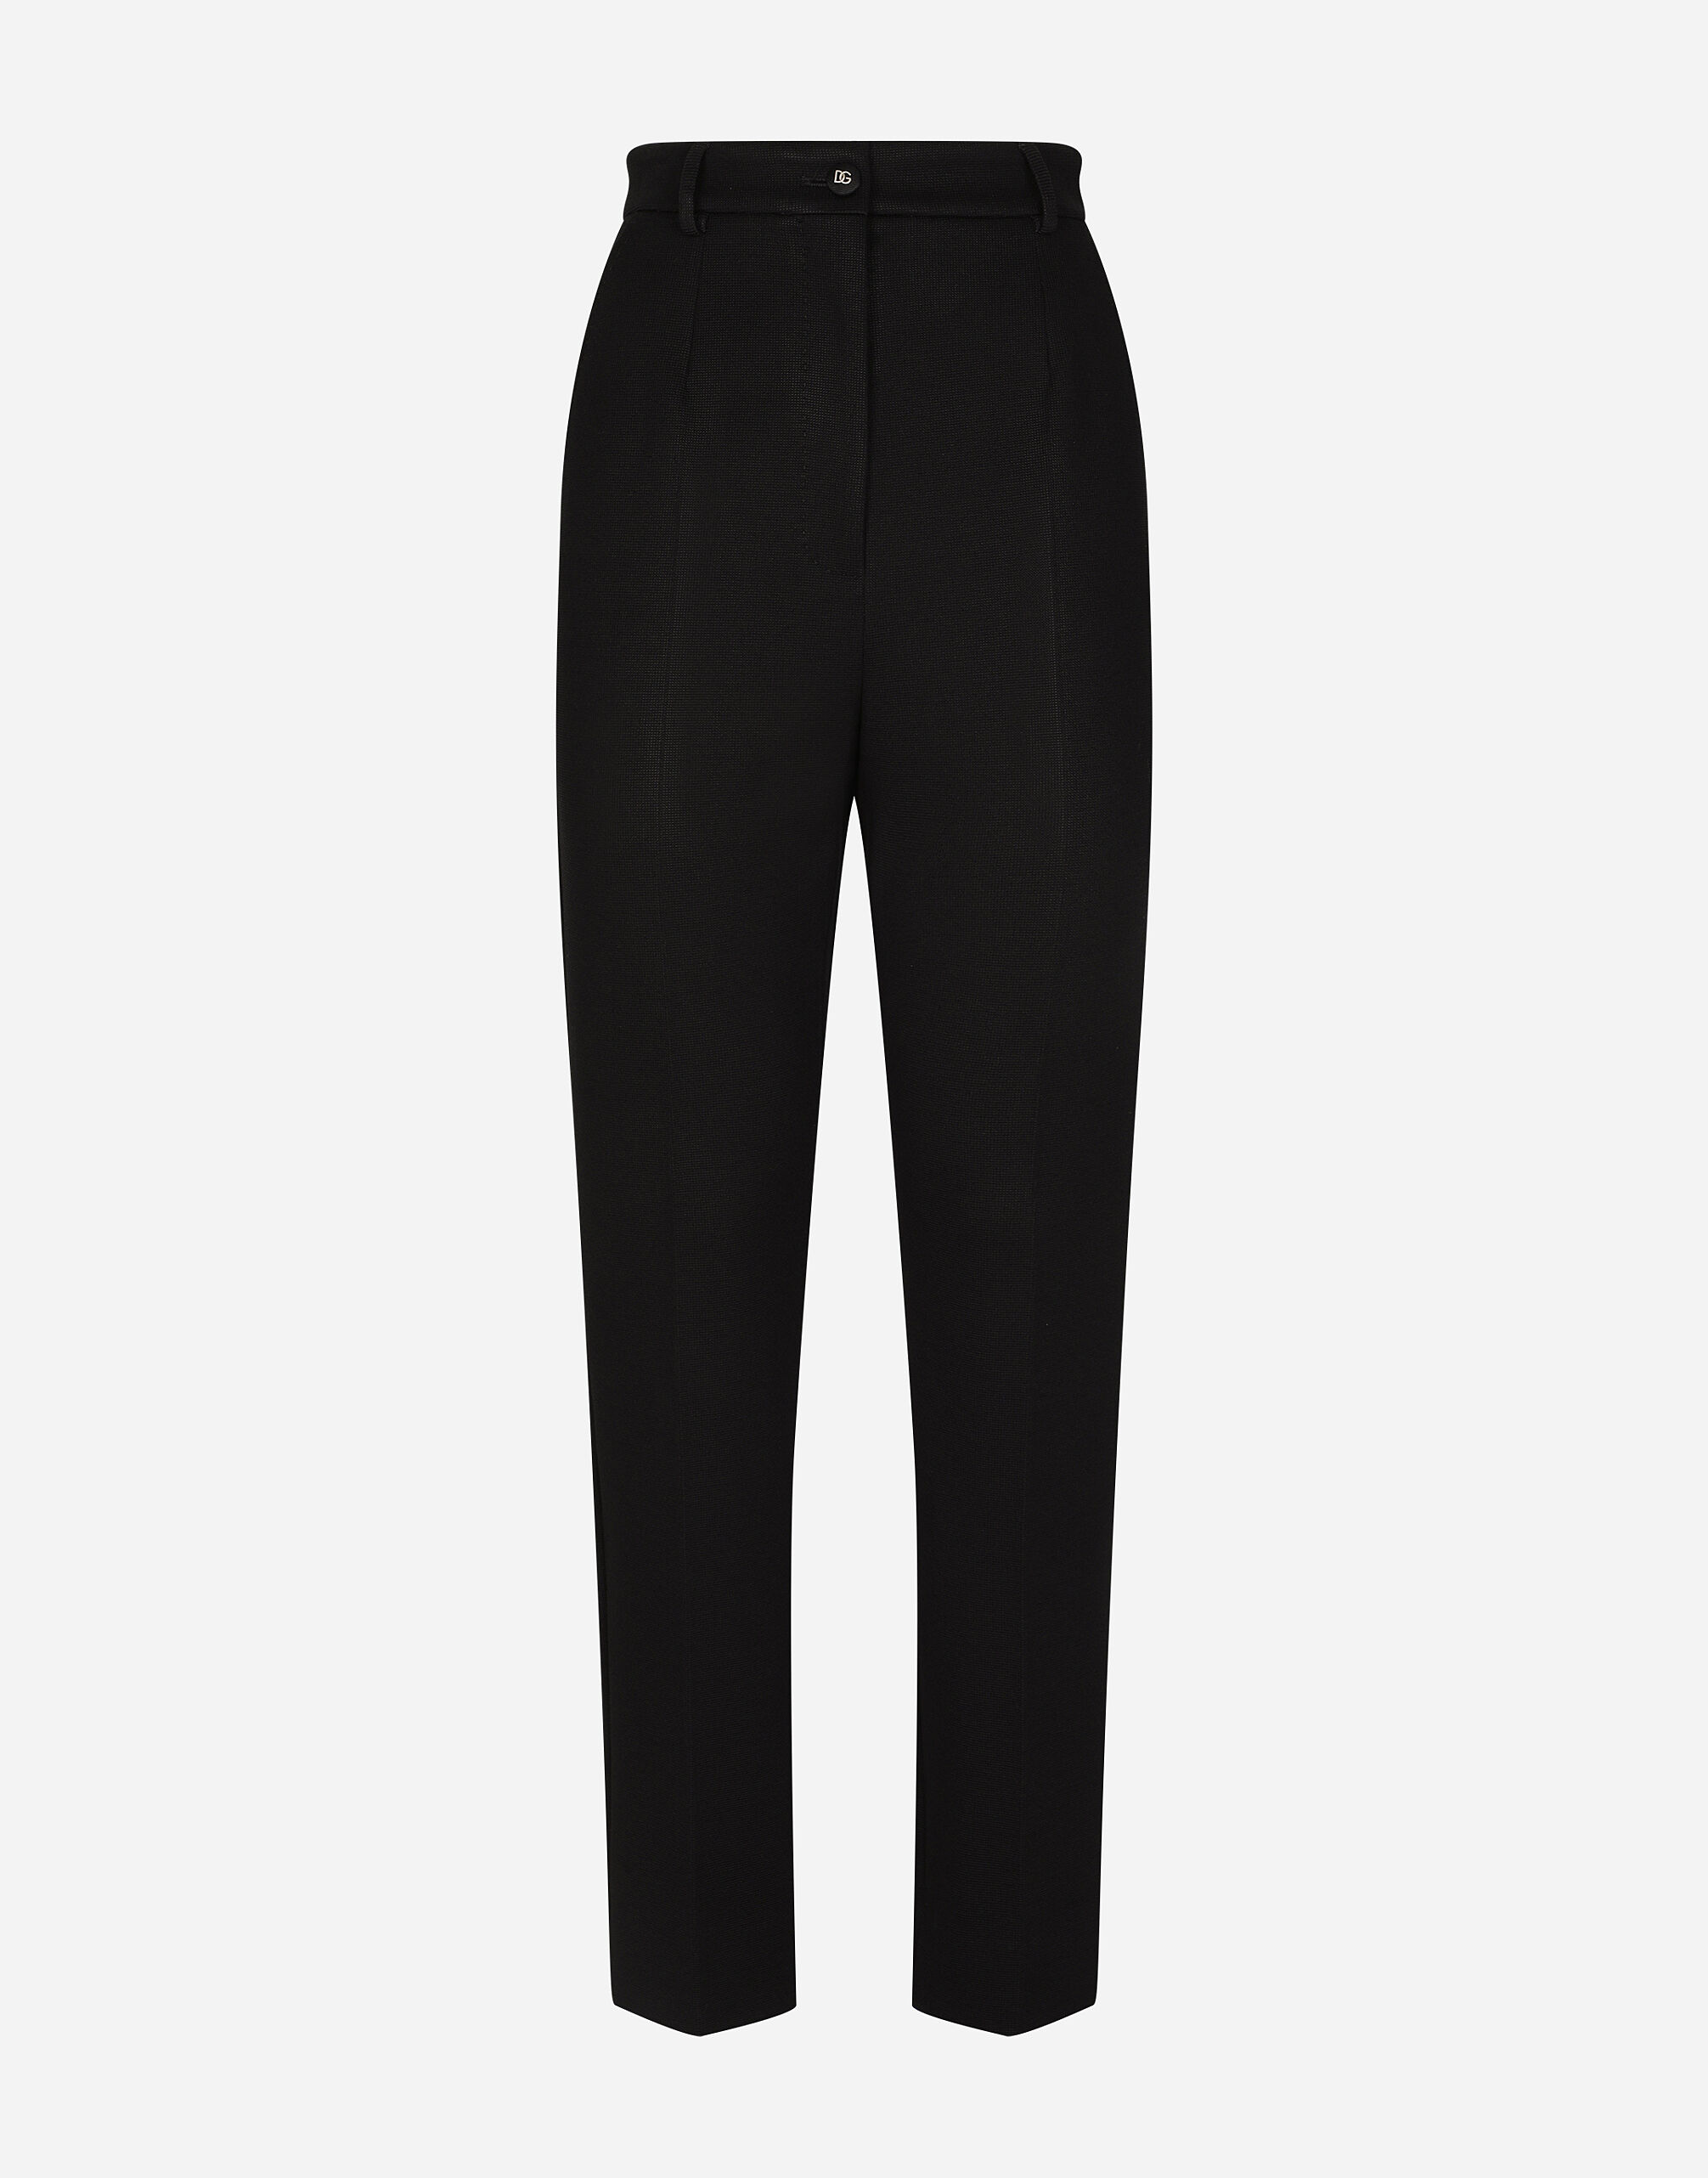 Boys Black Tailored Fit Adjustable Waist Trousers | Milano Mayfair -  childrensspecialoccasionwear.co.uk